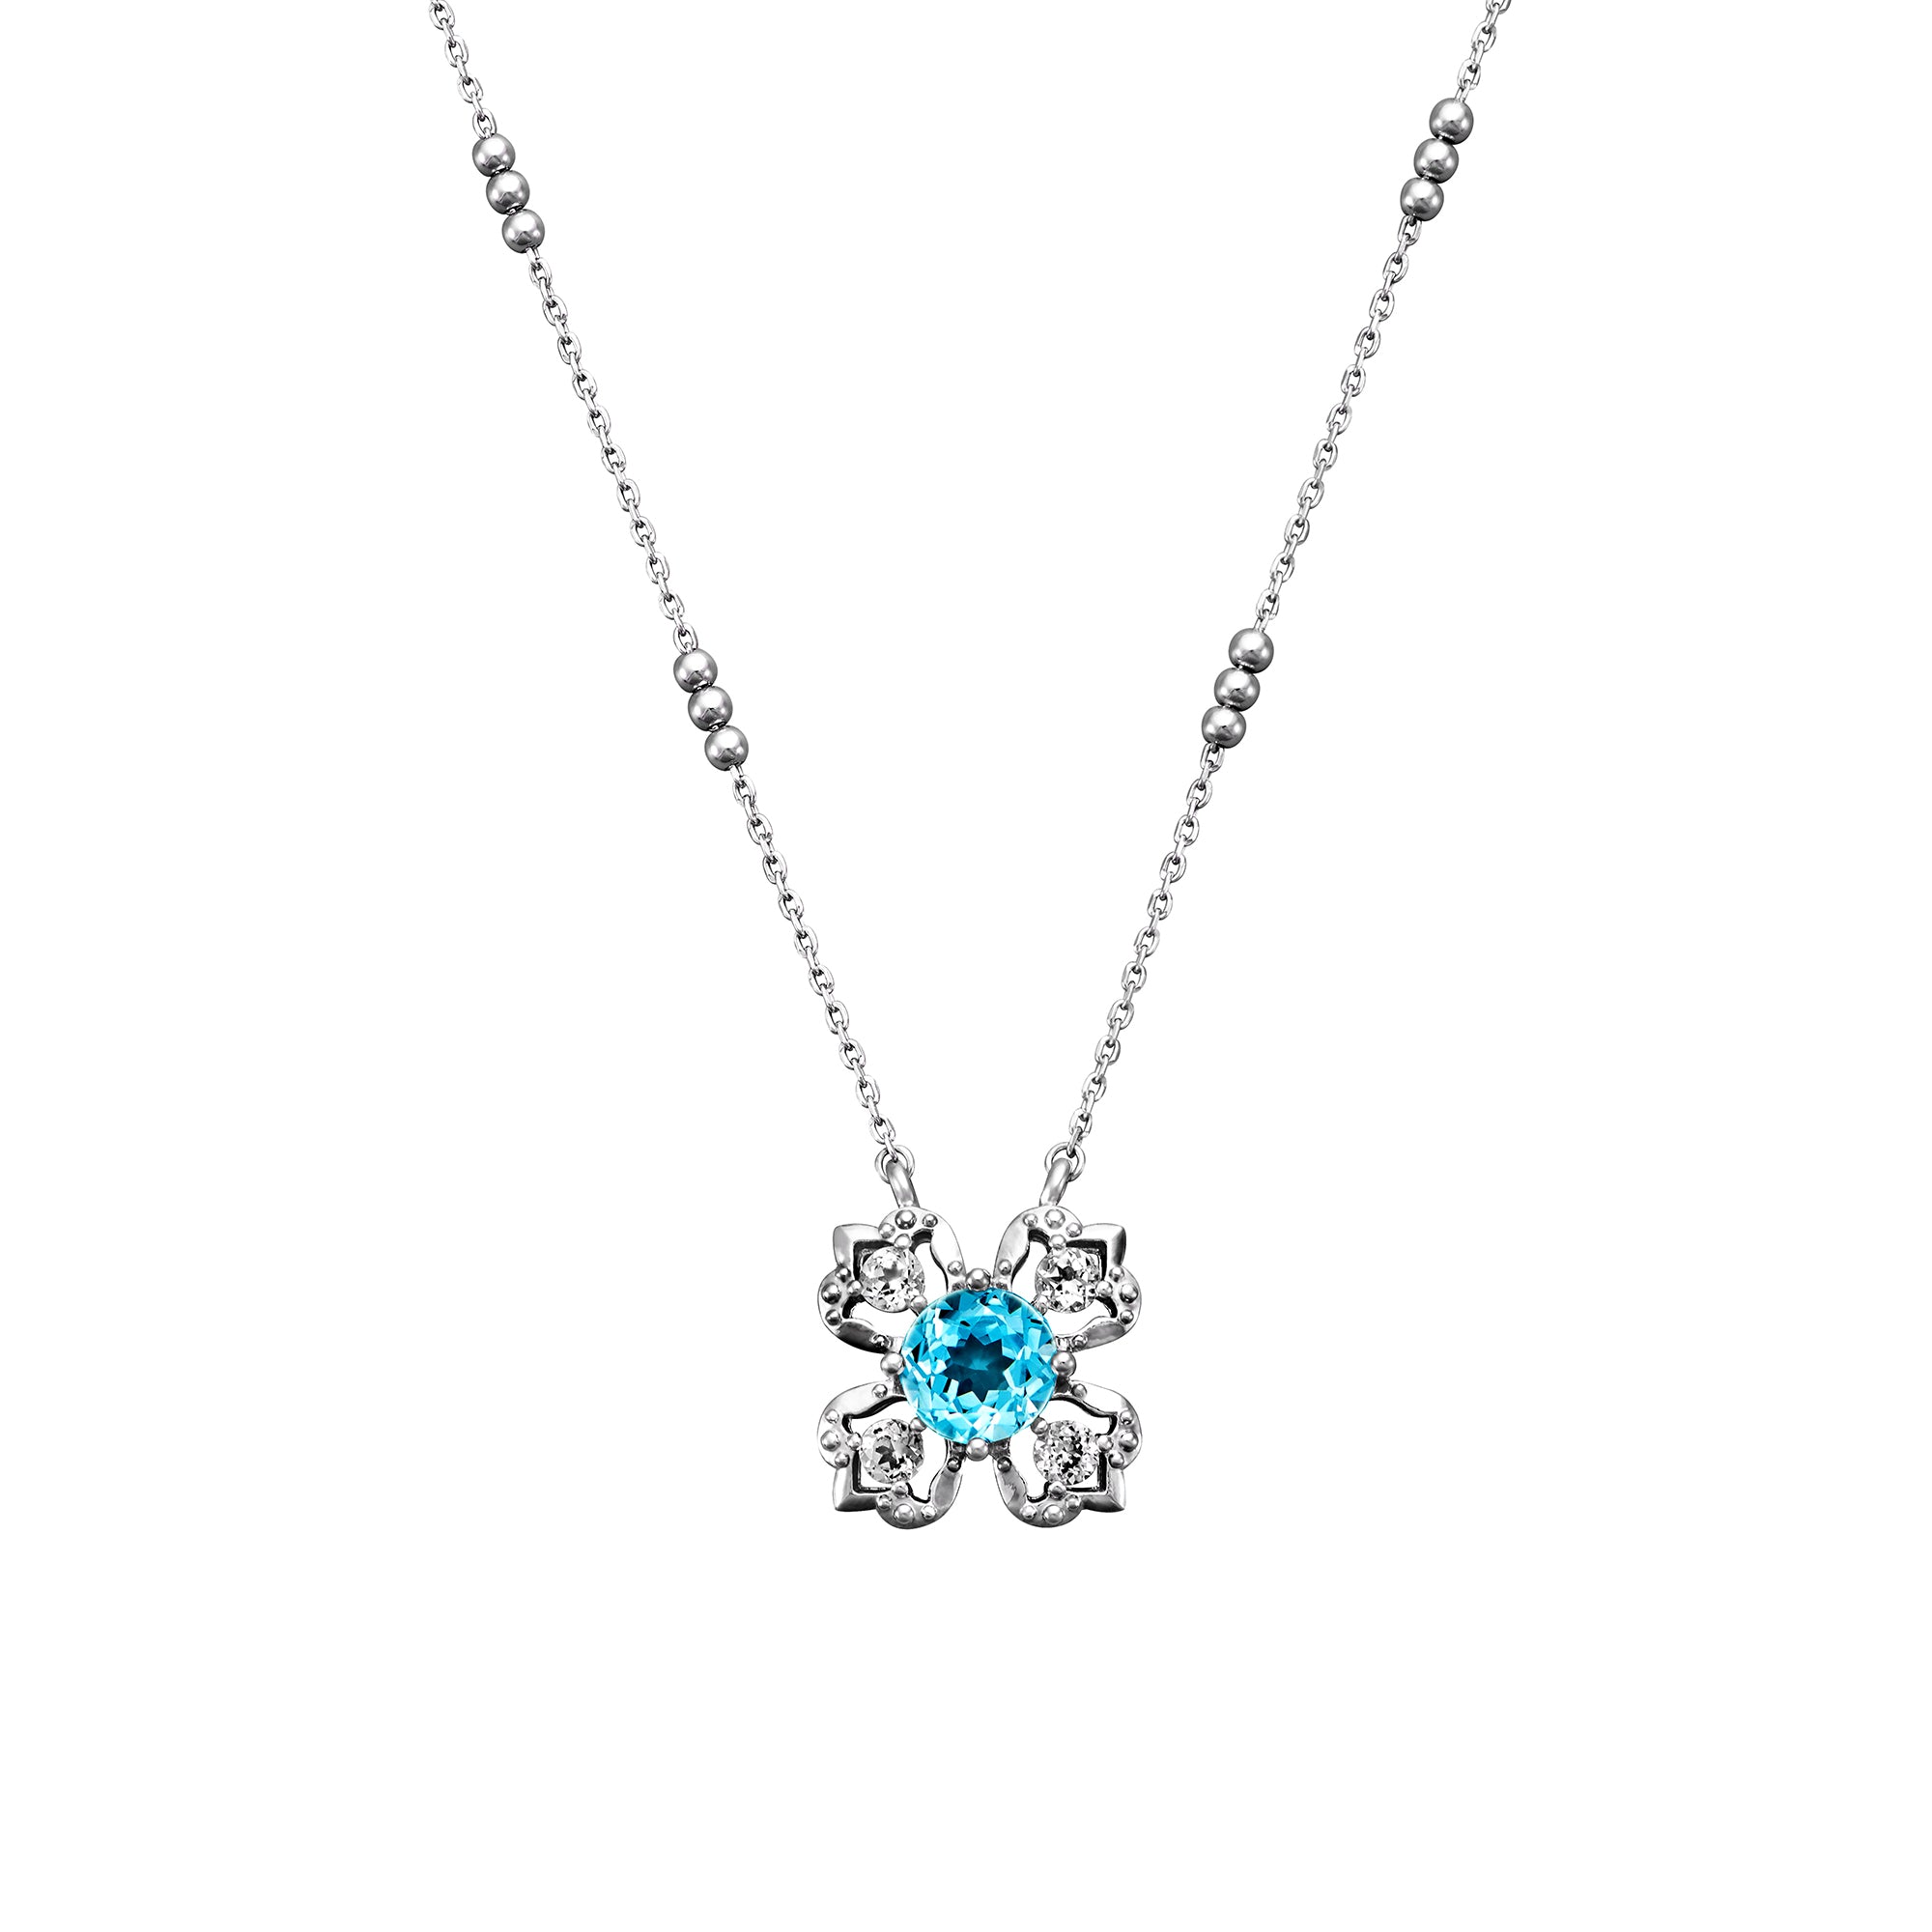 Peranakan Kebaya Necklace (RH) with Sky Blue Topaz Front View